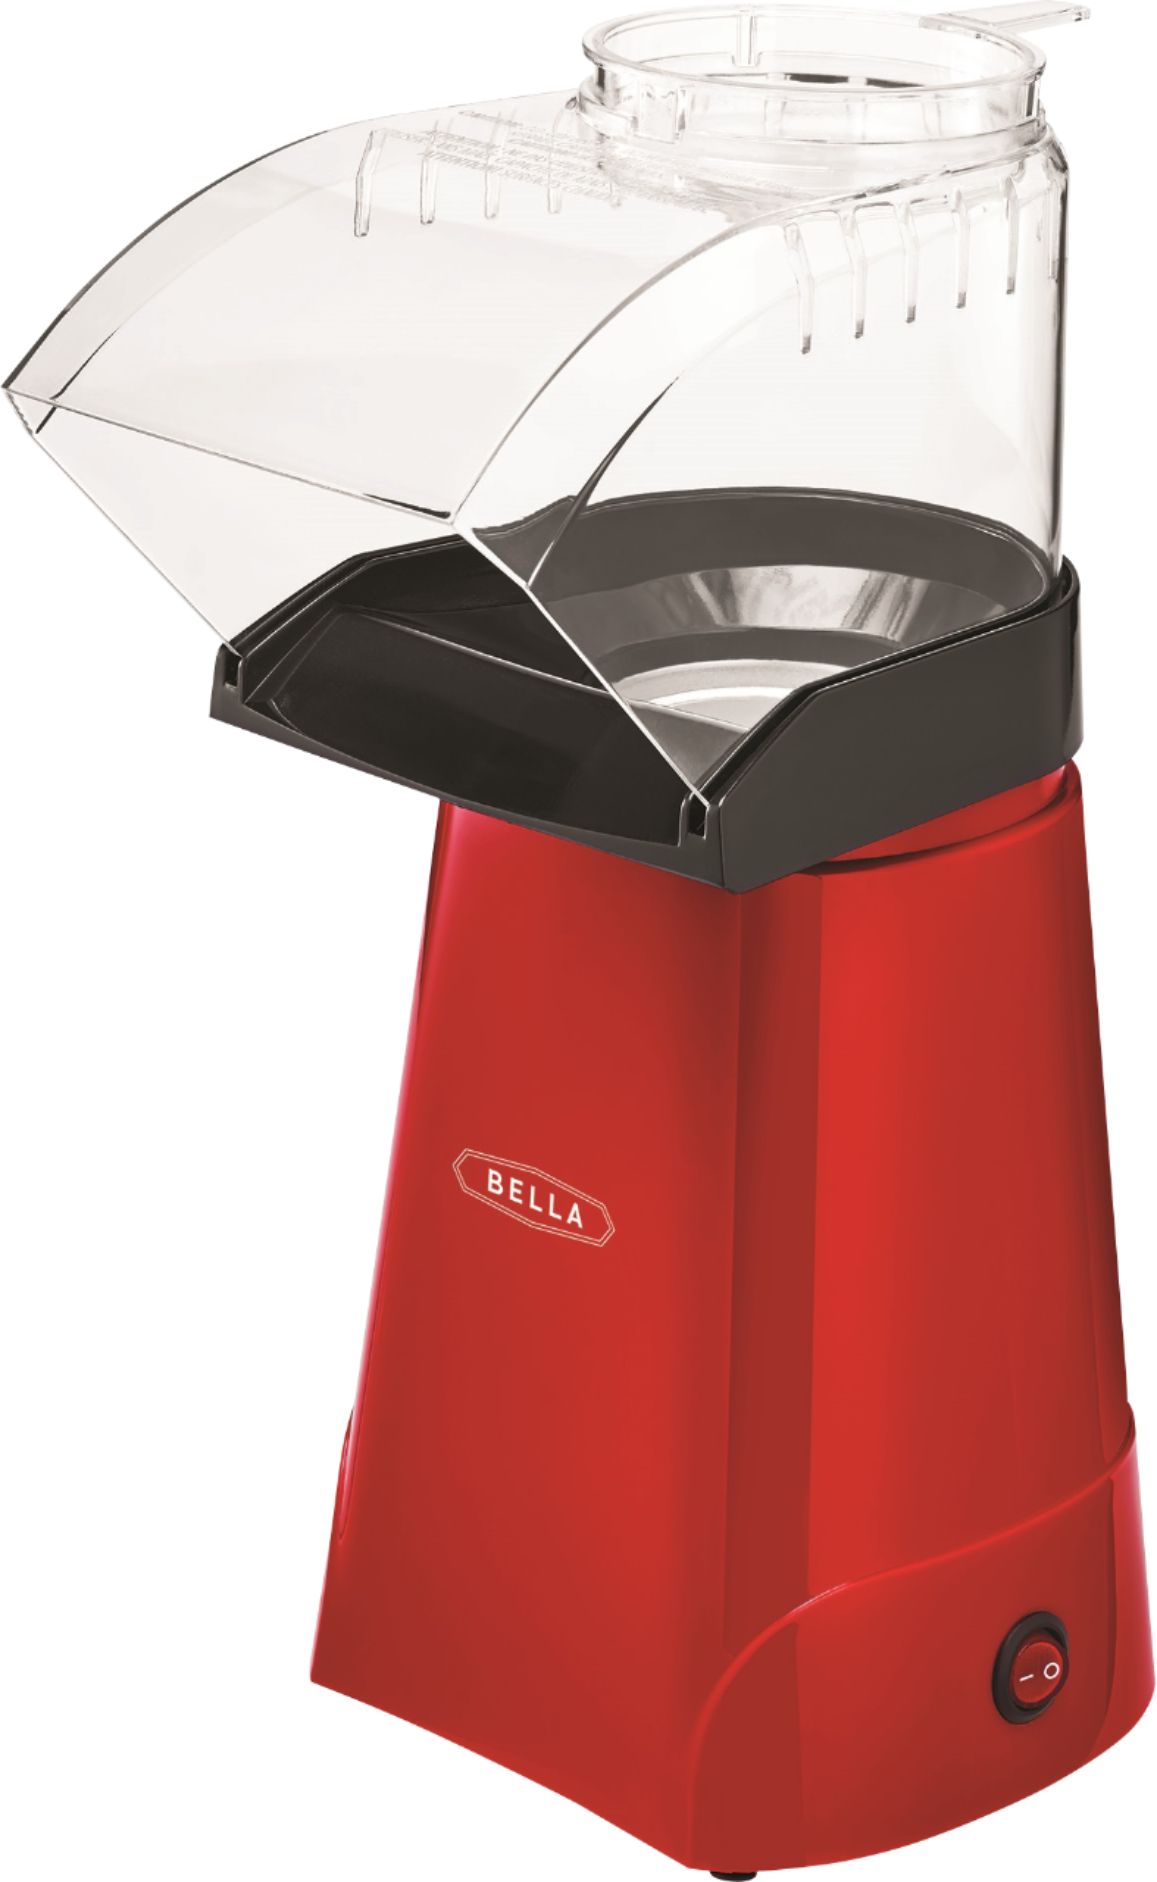 Zoom in on Angle Zoom. Bella - 12-Cup Hot Air Popcorn Maker - Red.